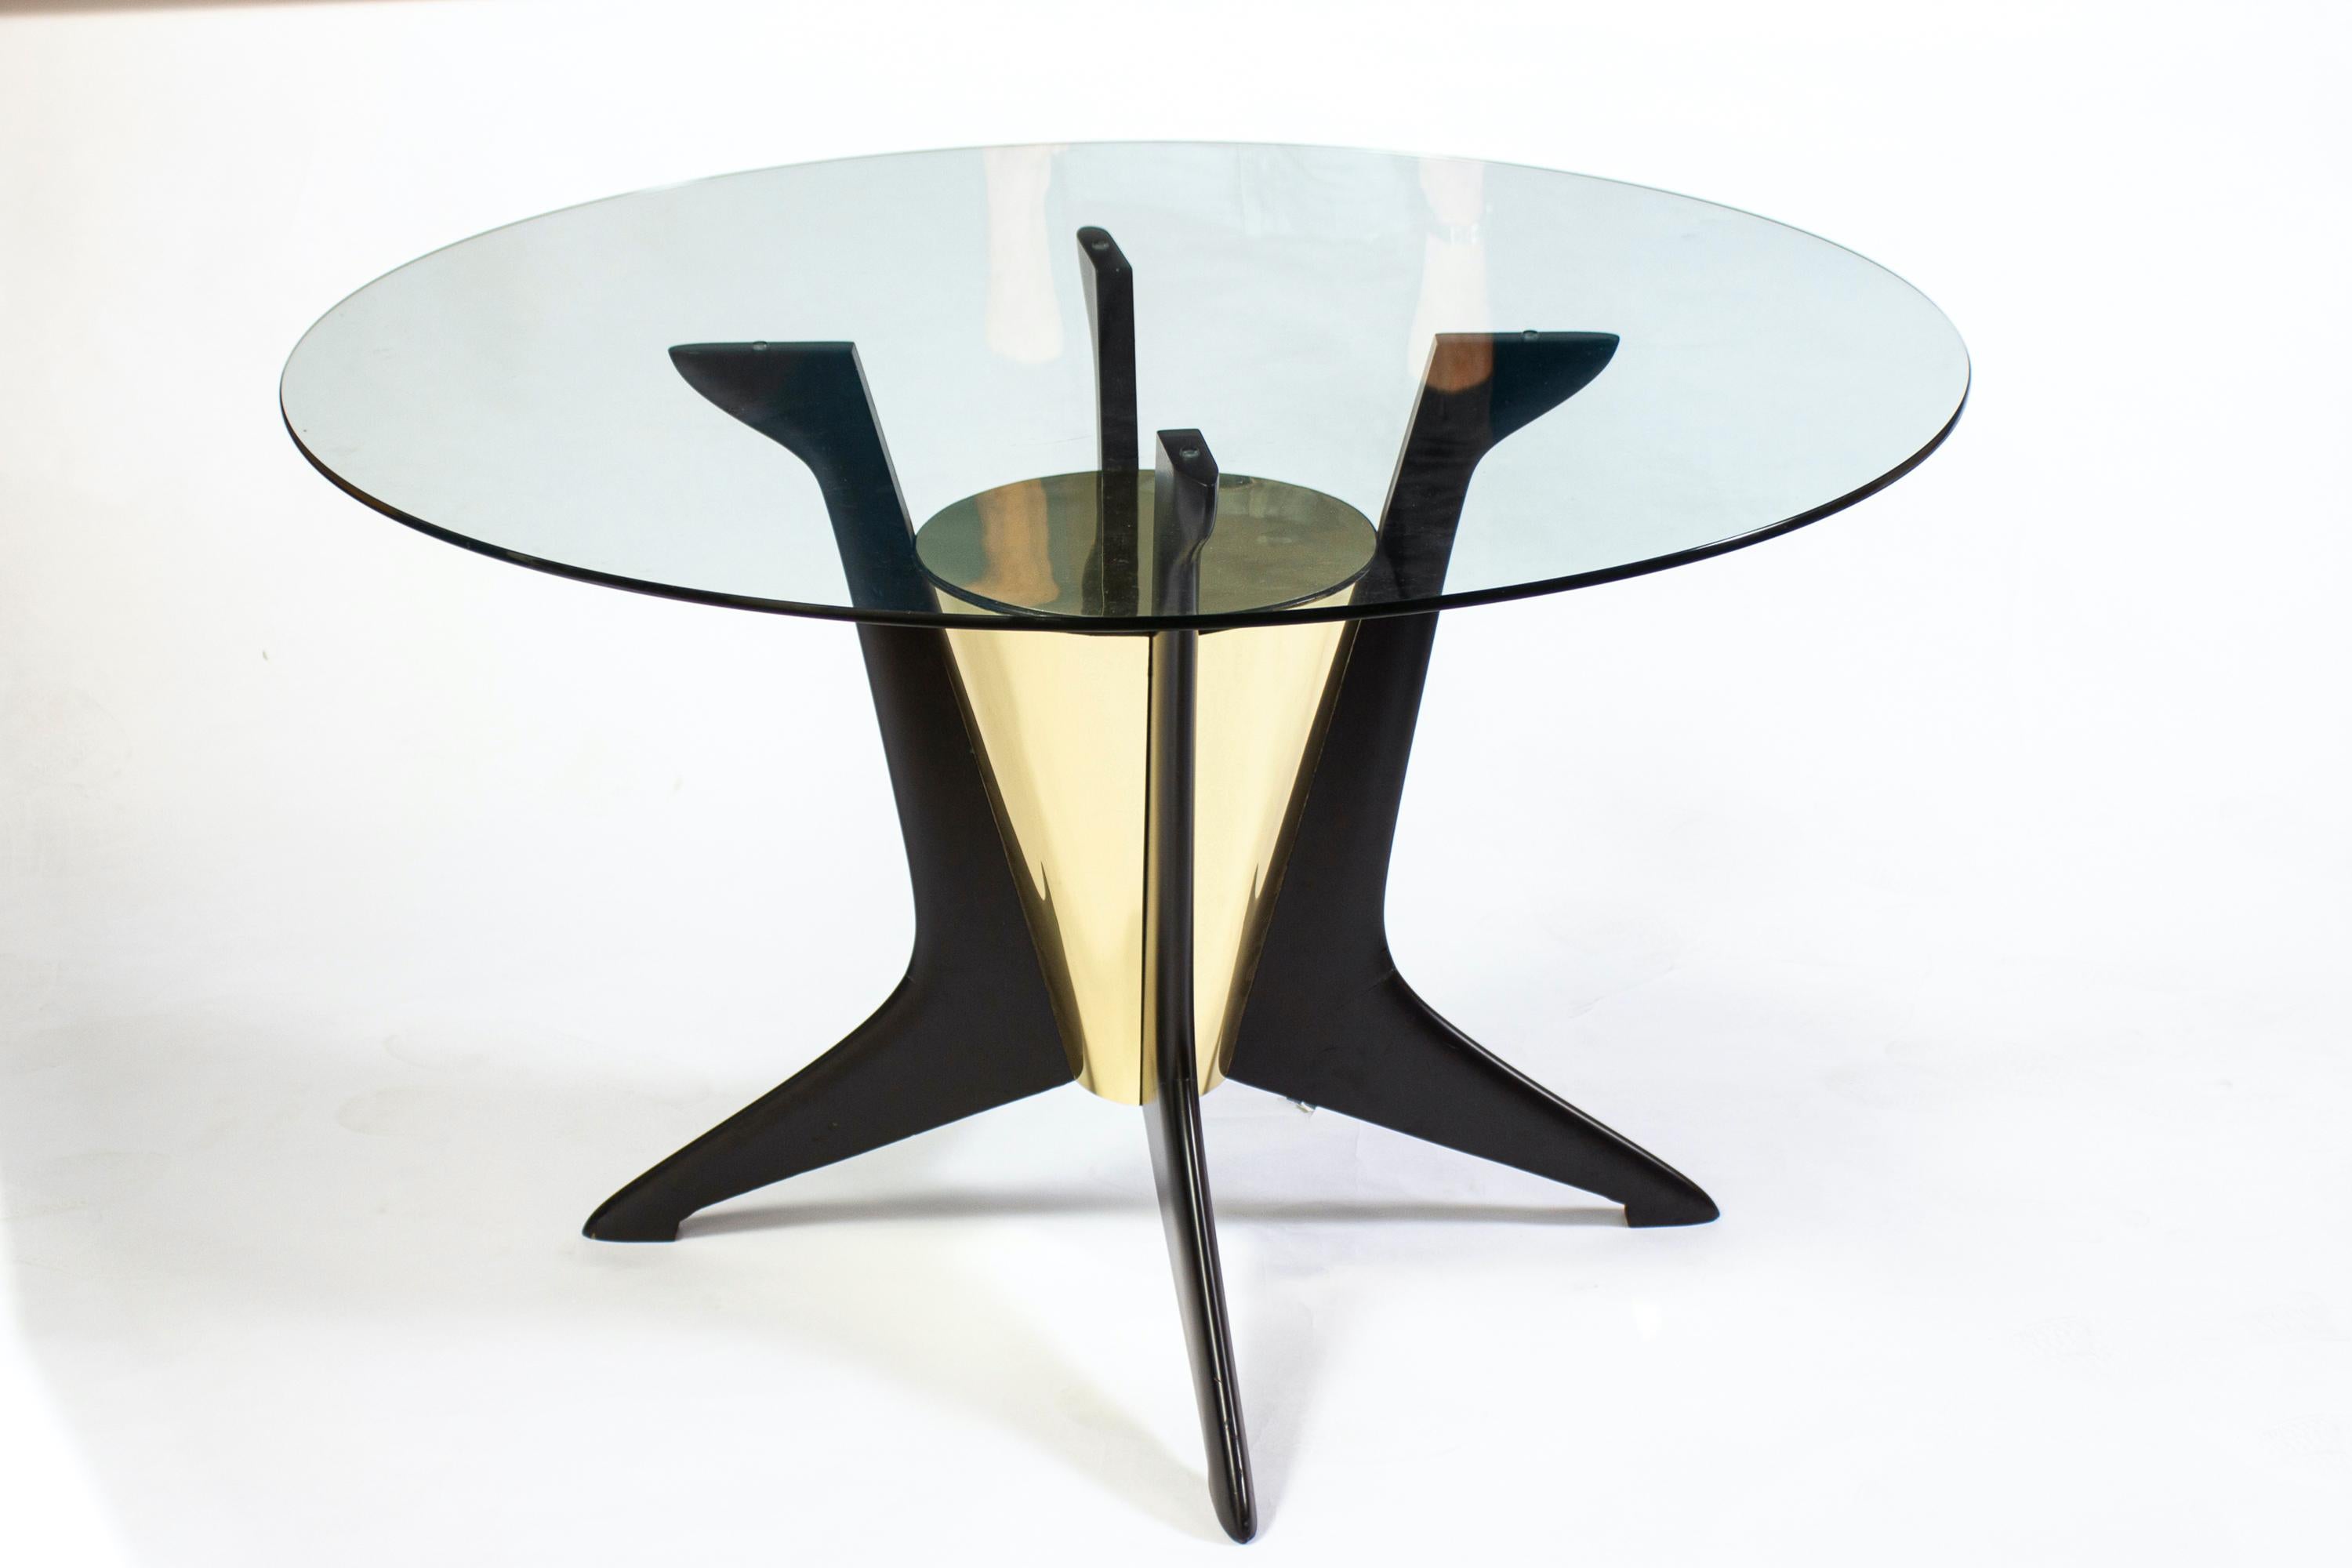 Striking Mid-Century round glass Dining or Center Table Attributed to Ico Parisi 
Elegant design geometric brass center cone , supported by three black painted legs.  
Excellent original vintage condition.
Can be used as a dining table or a center